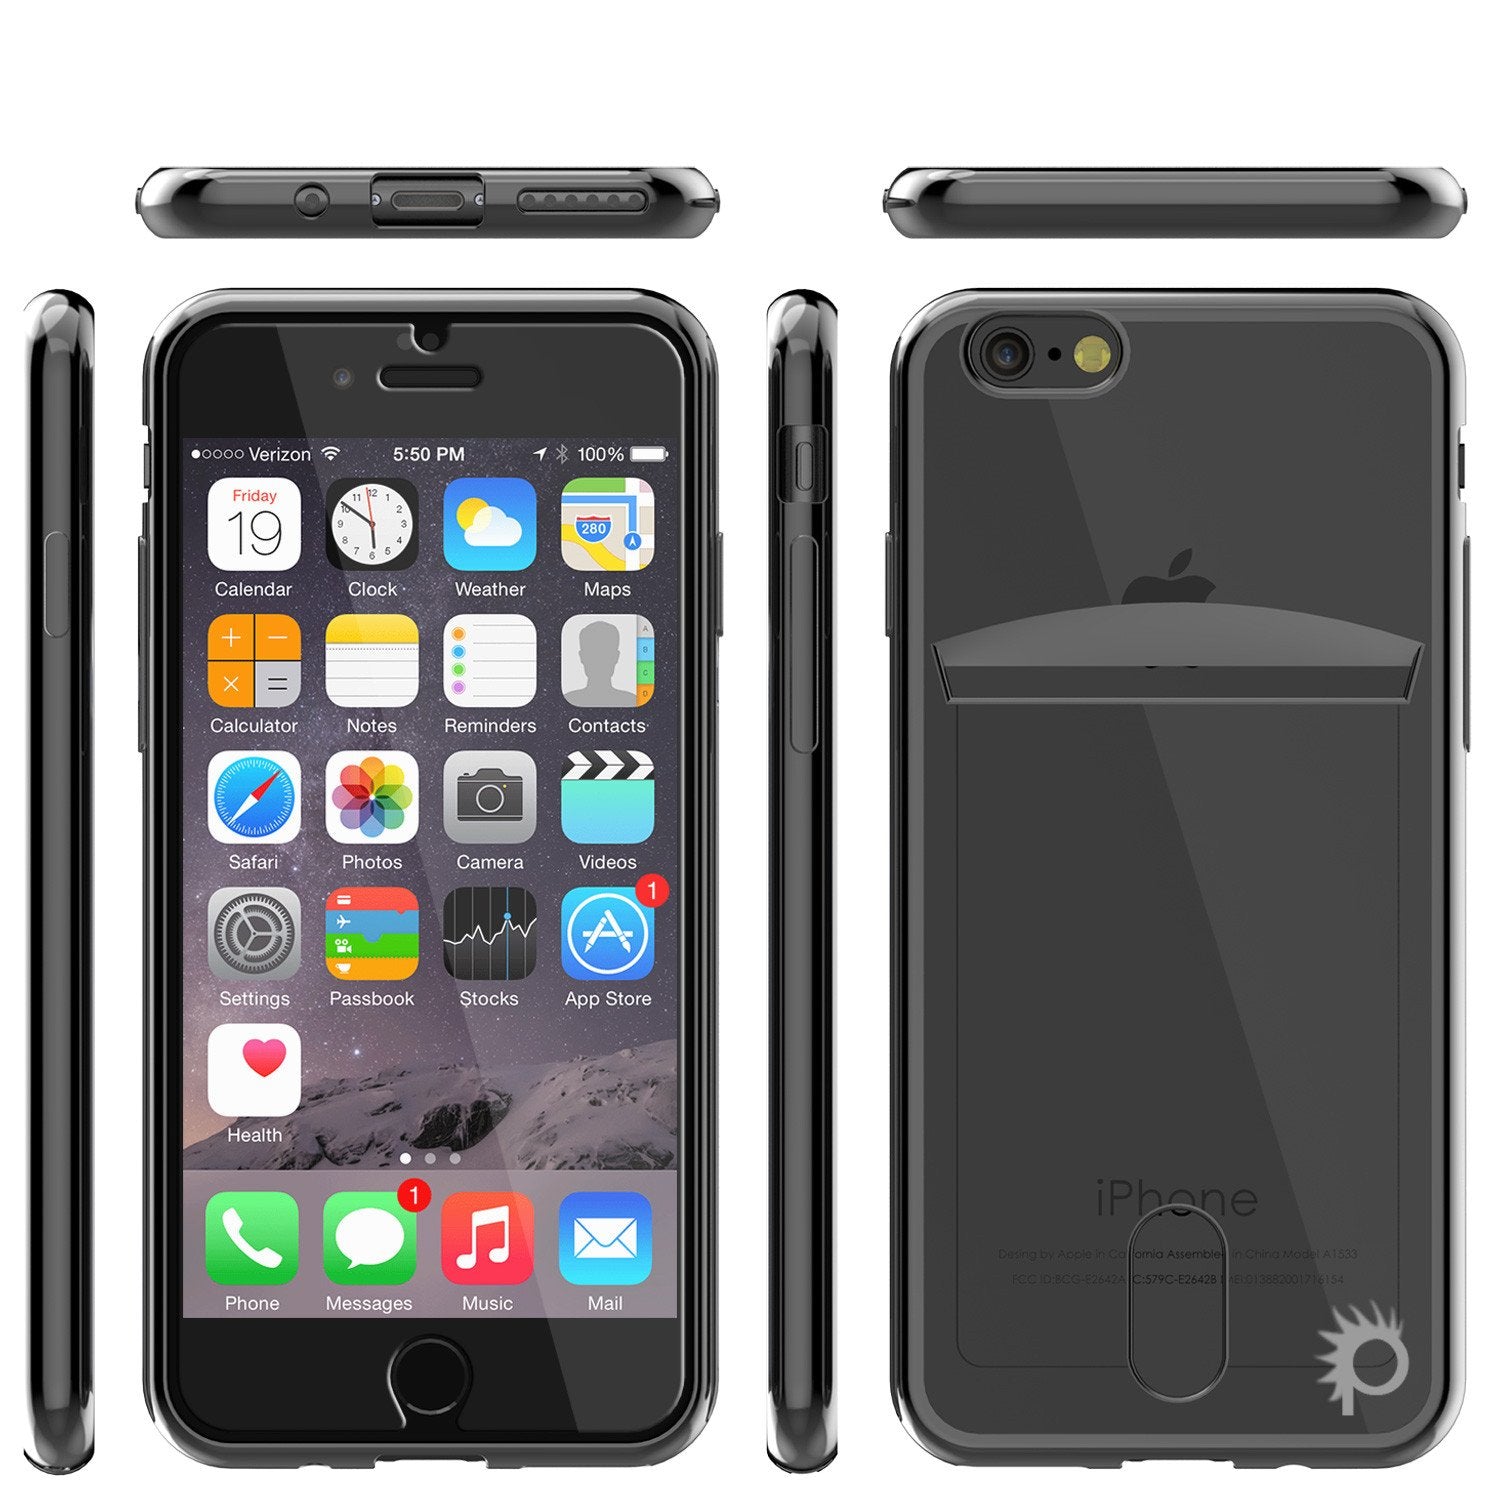 iPhone 7 Case, PUNKCASE® LUCID Black Series | Card Slot | SHIELD Screen Protector | Ultra fit - PunkCase NZ